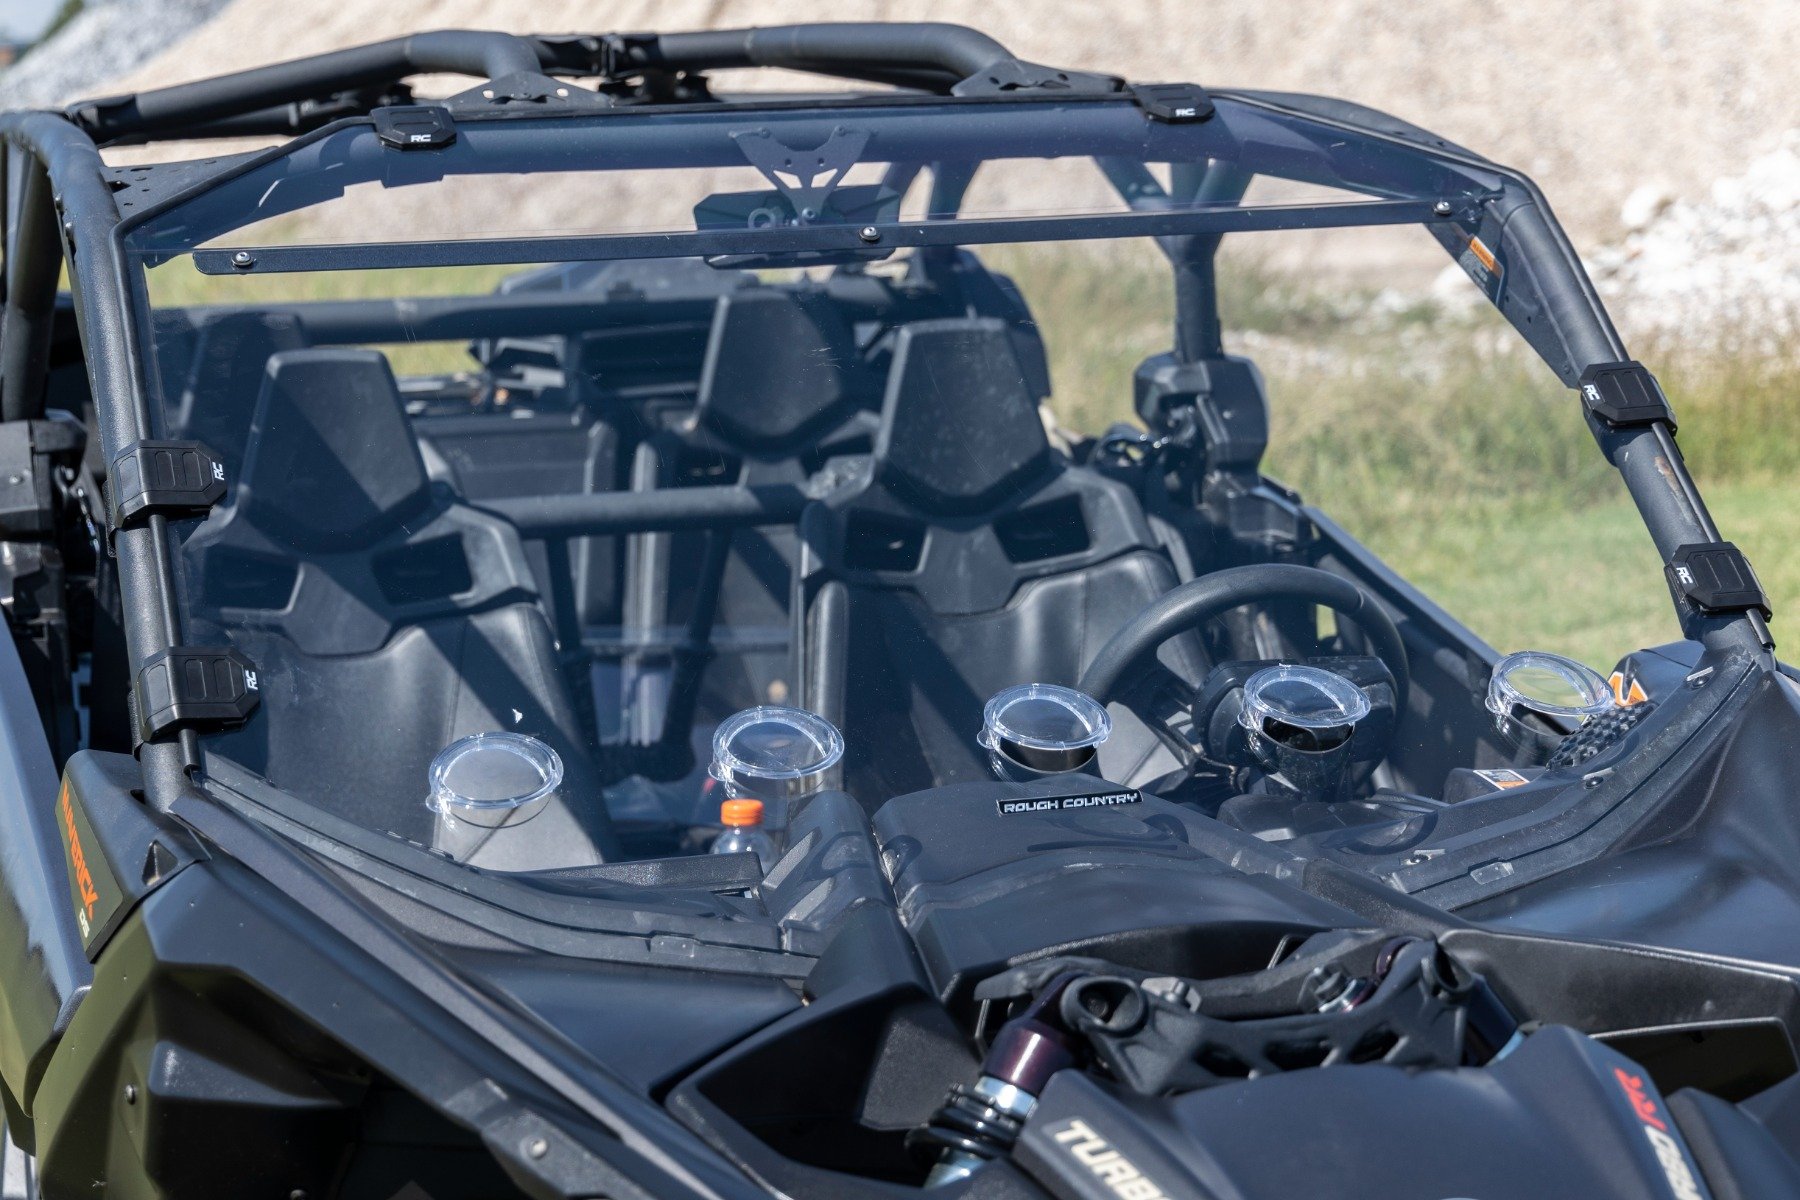 Vented Full Windshield | Scratch Resistant | Can-Am Maverick X3